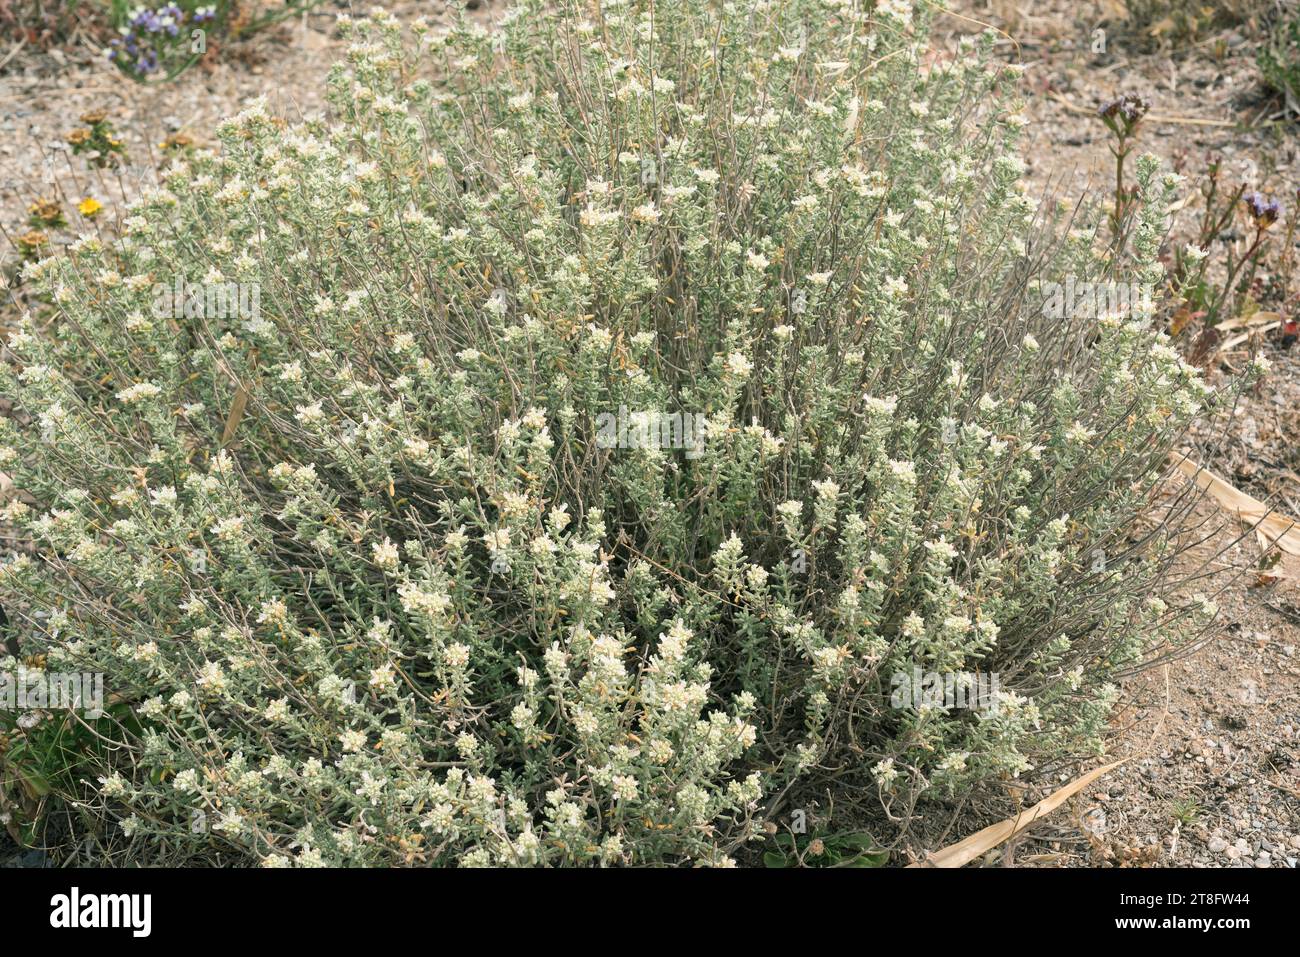 Teucrium dunense is a perennial plant native to coasts of southern and eastern Iberian Peninsula, Balearic Islands and south France. This photo was ta Stock Photo